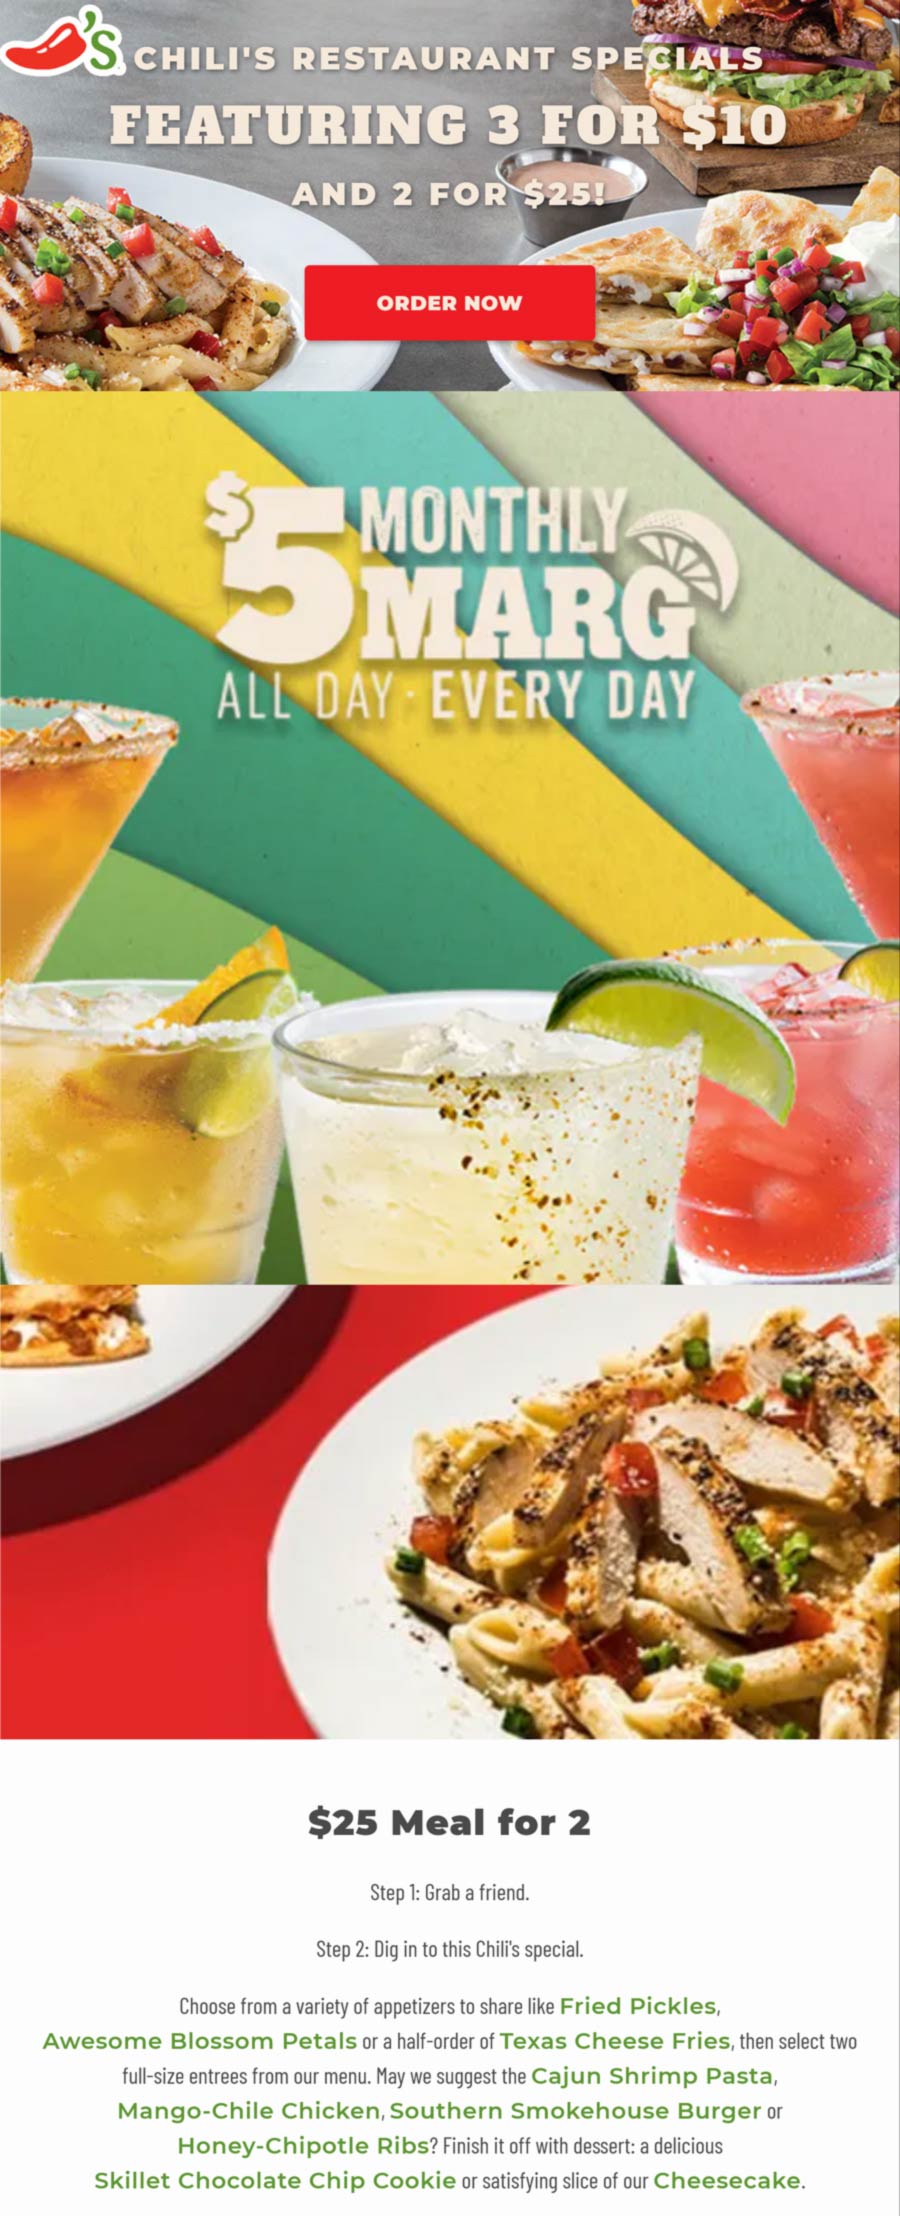 Entree + appetizer + drink 3 for 10 & 25 meal for 2 at Chilis